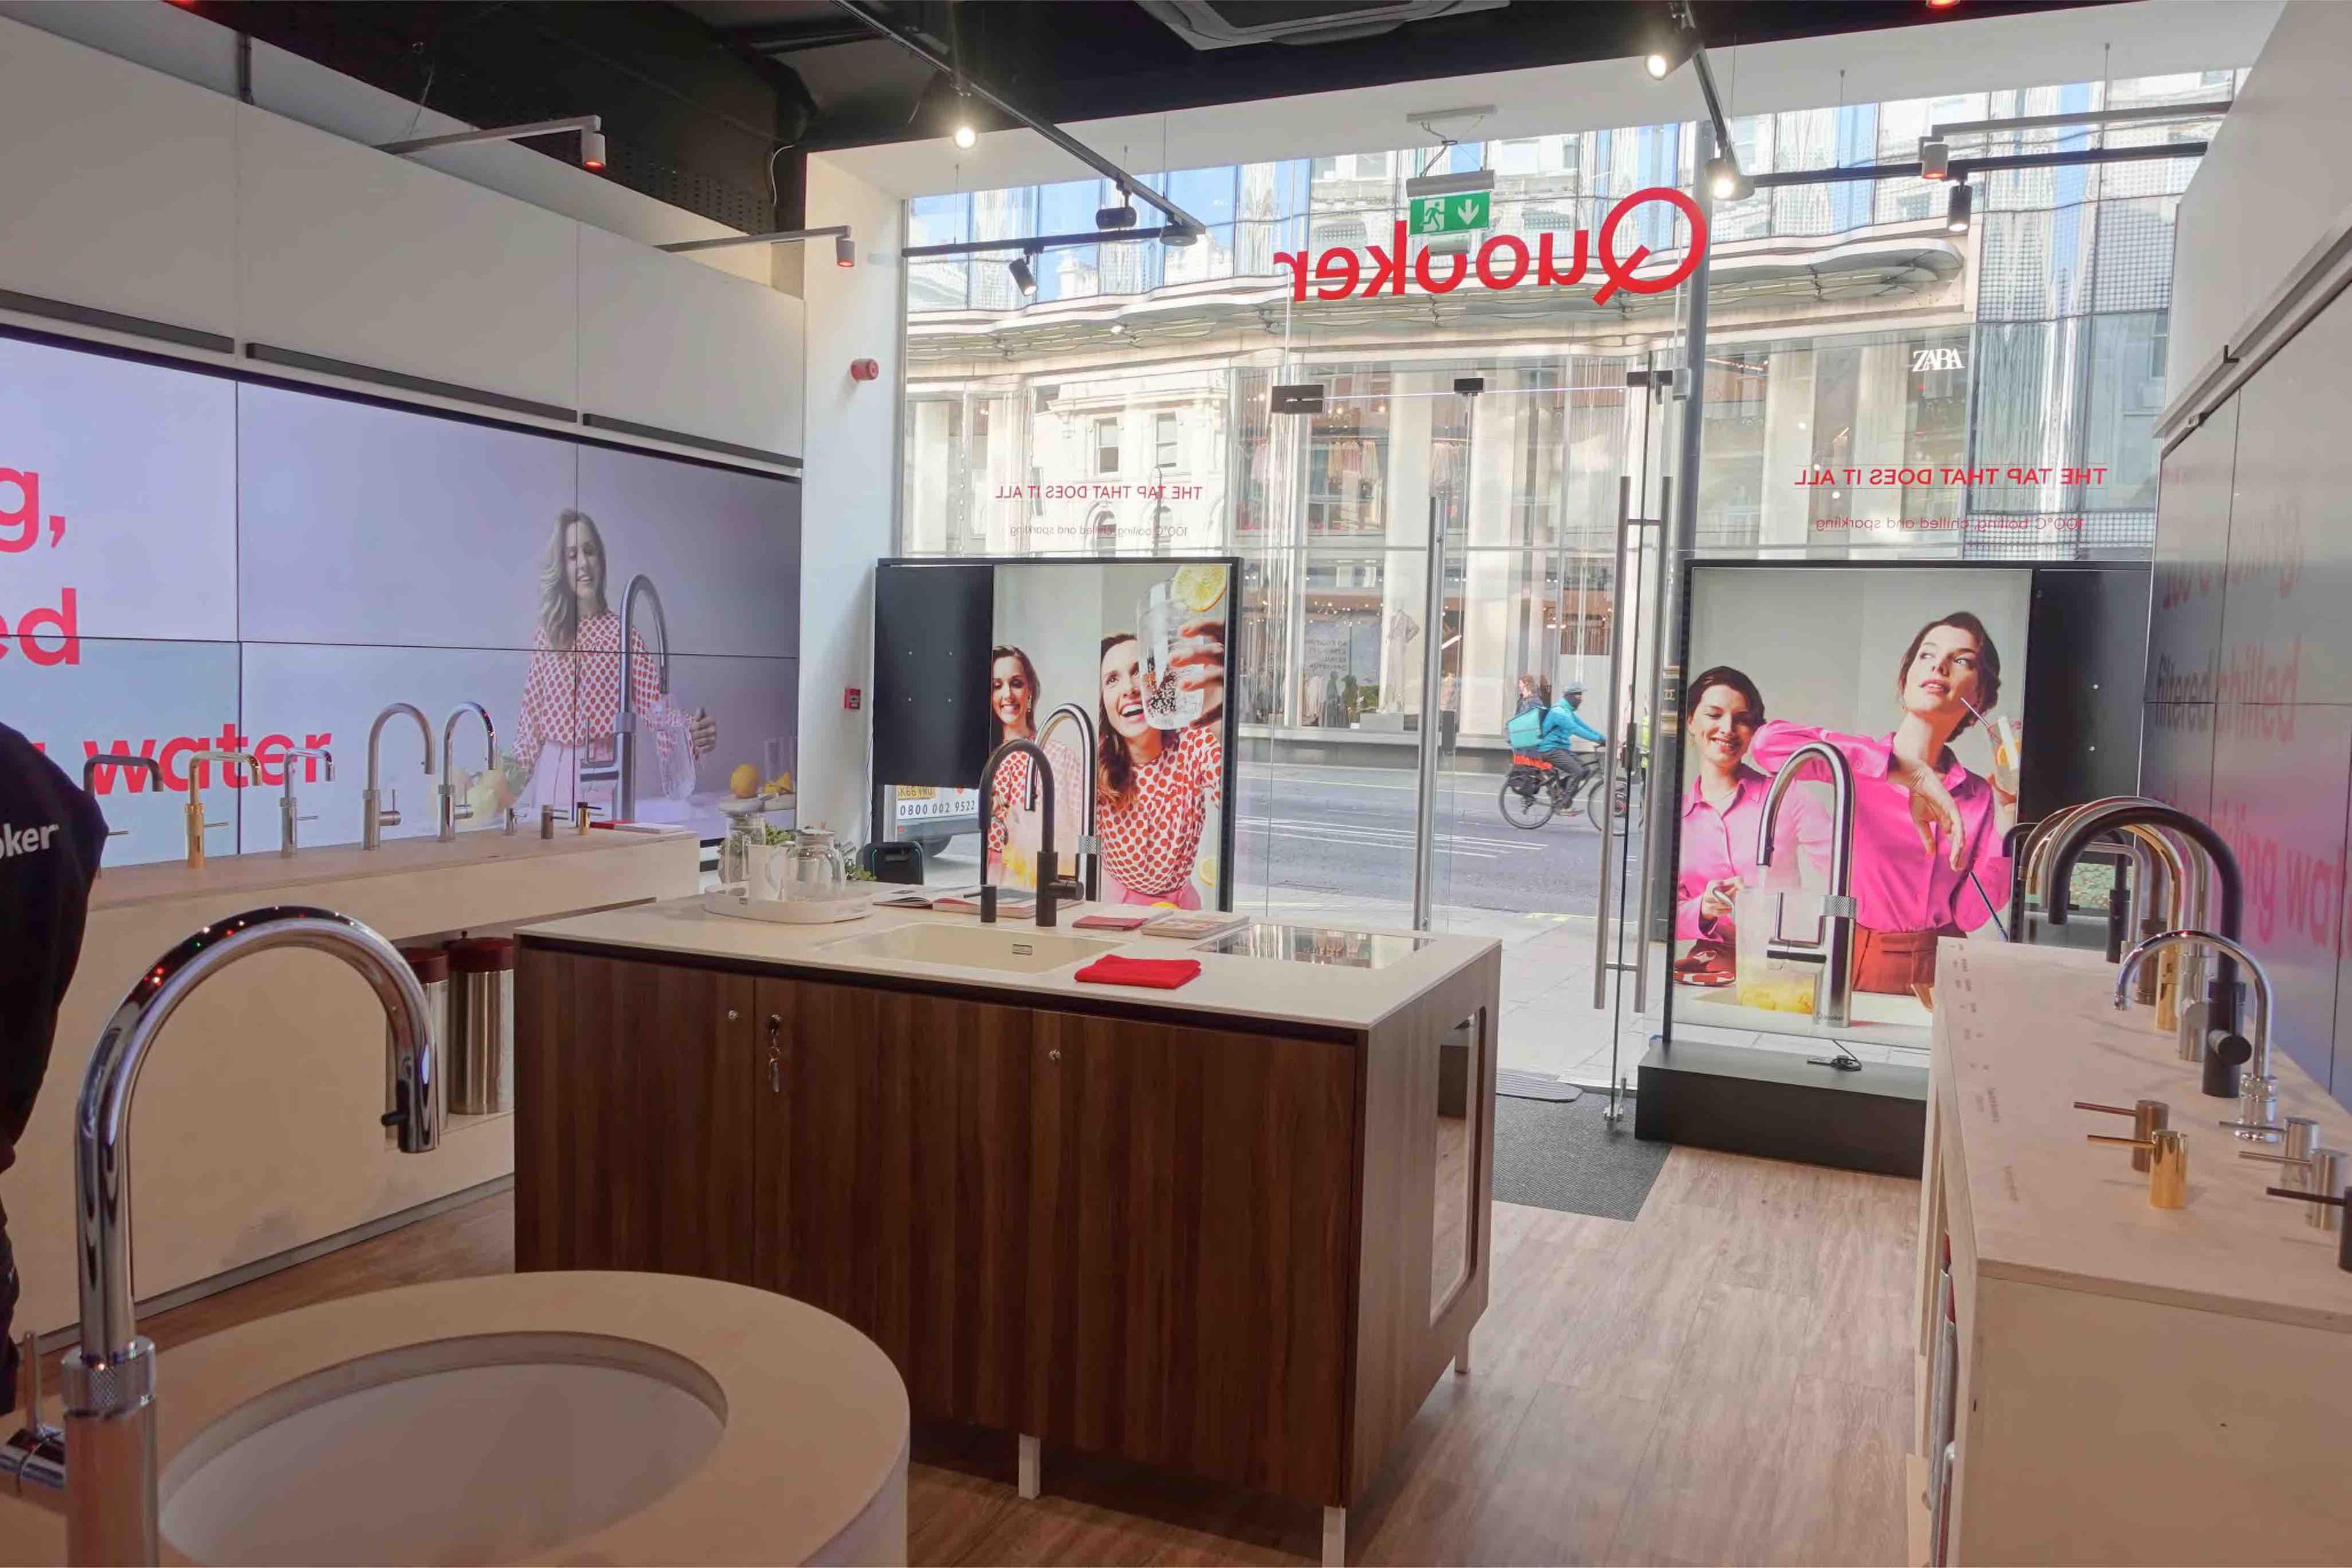 Inside the pop-up at 58 Oxford Street Sook of Quooker